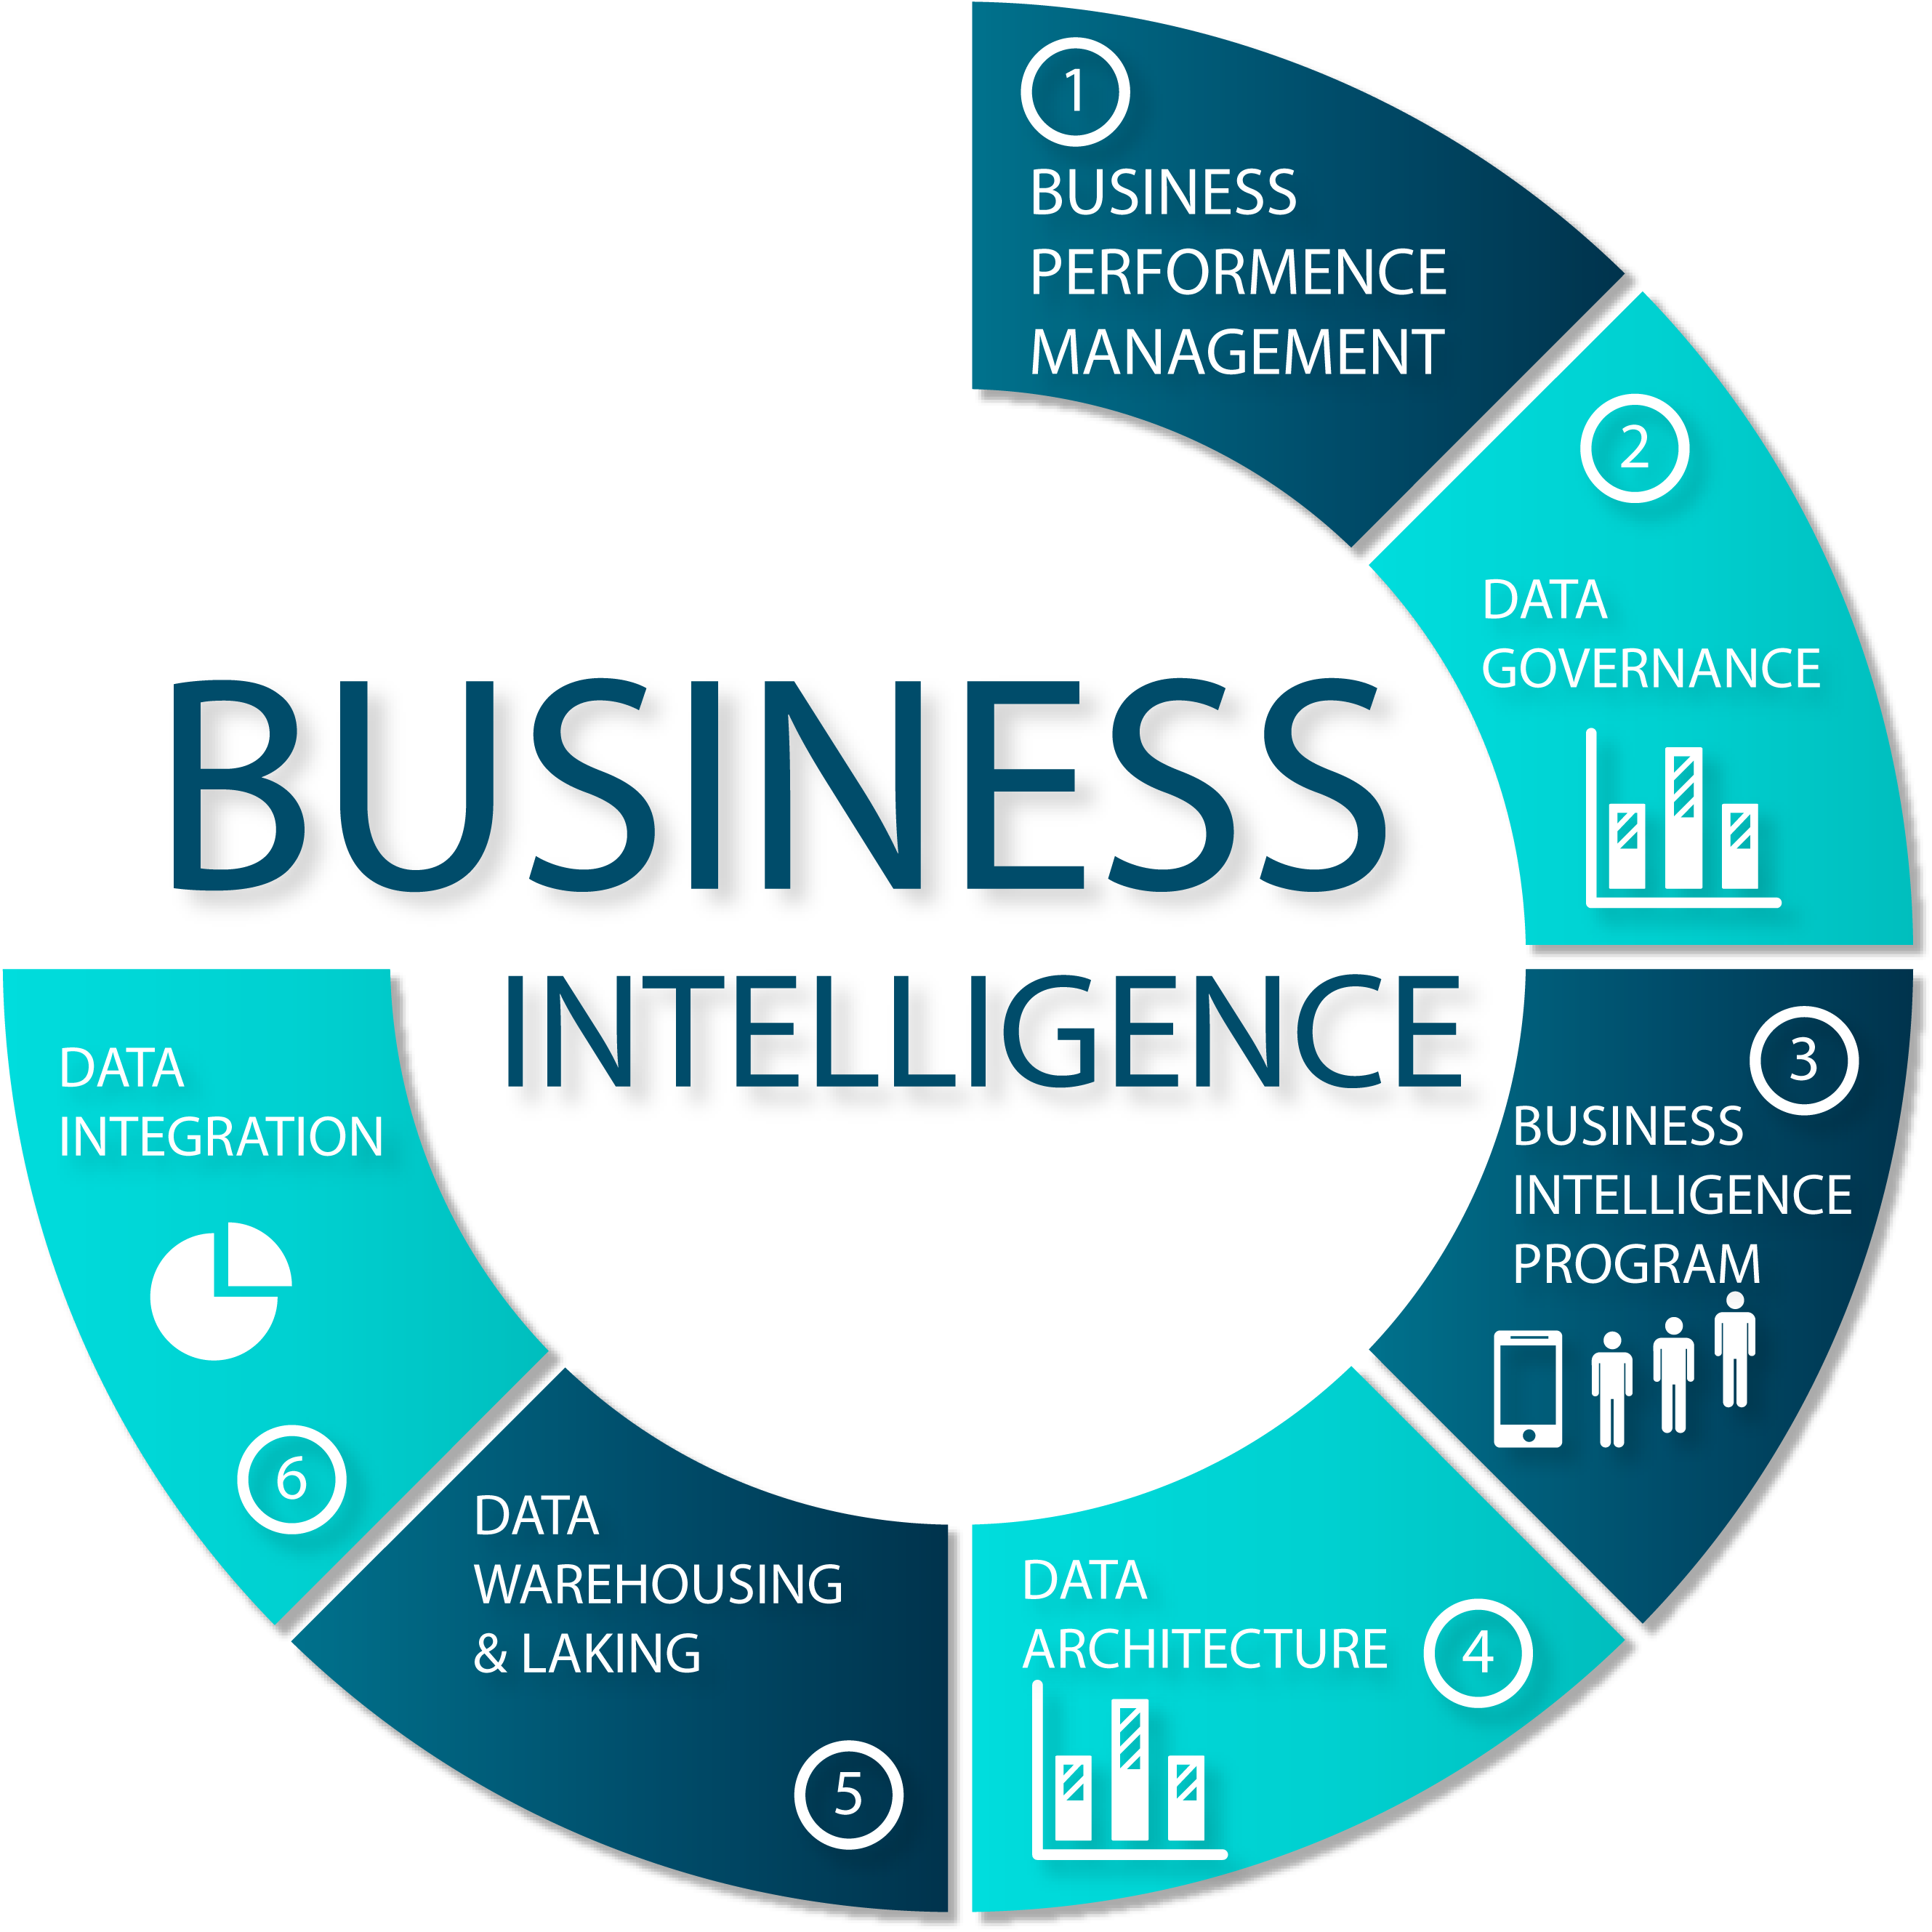 What are the responsibilities of a Business Intelligence Analyst?